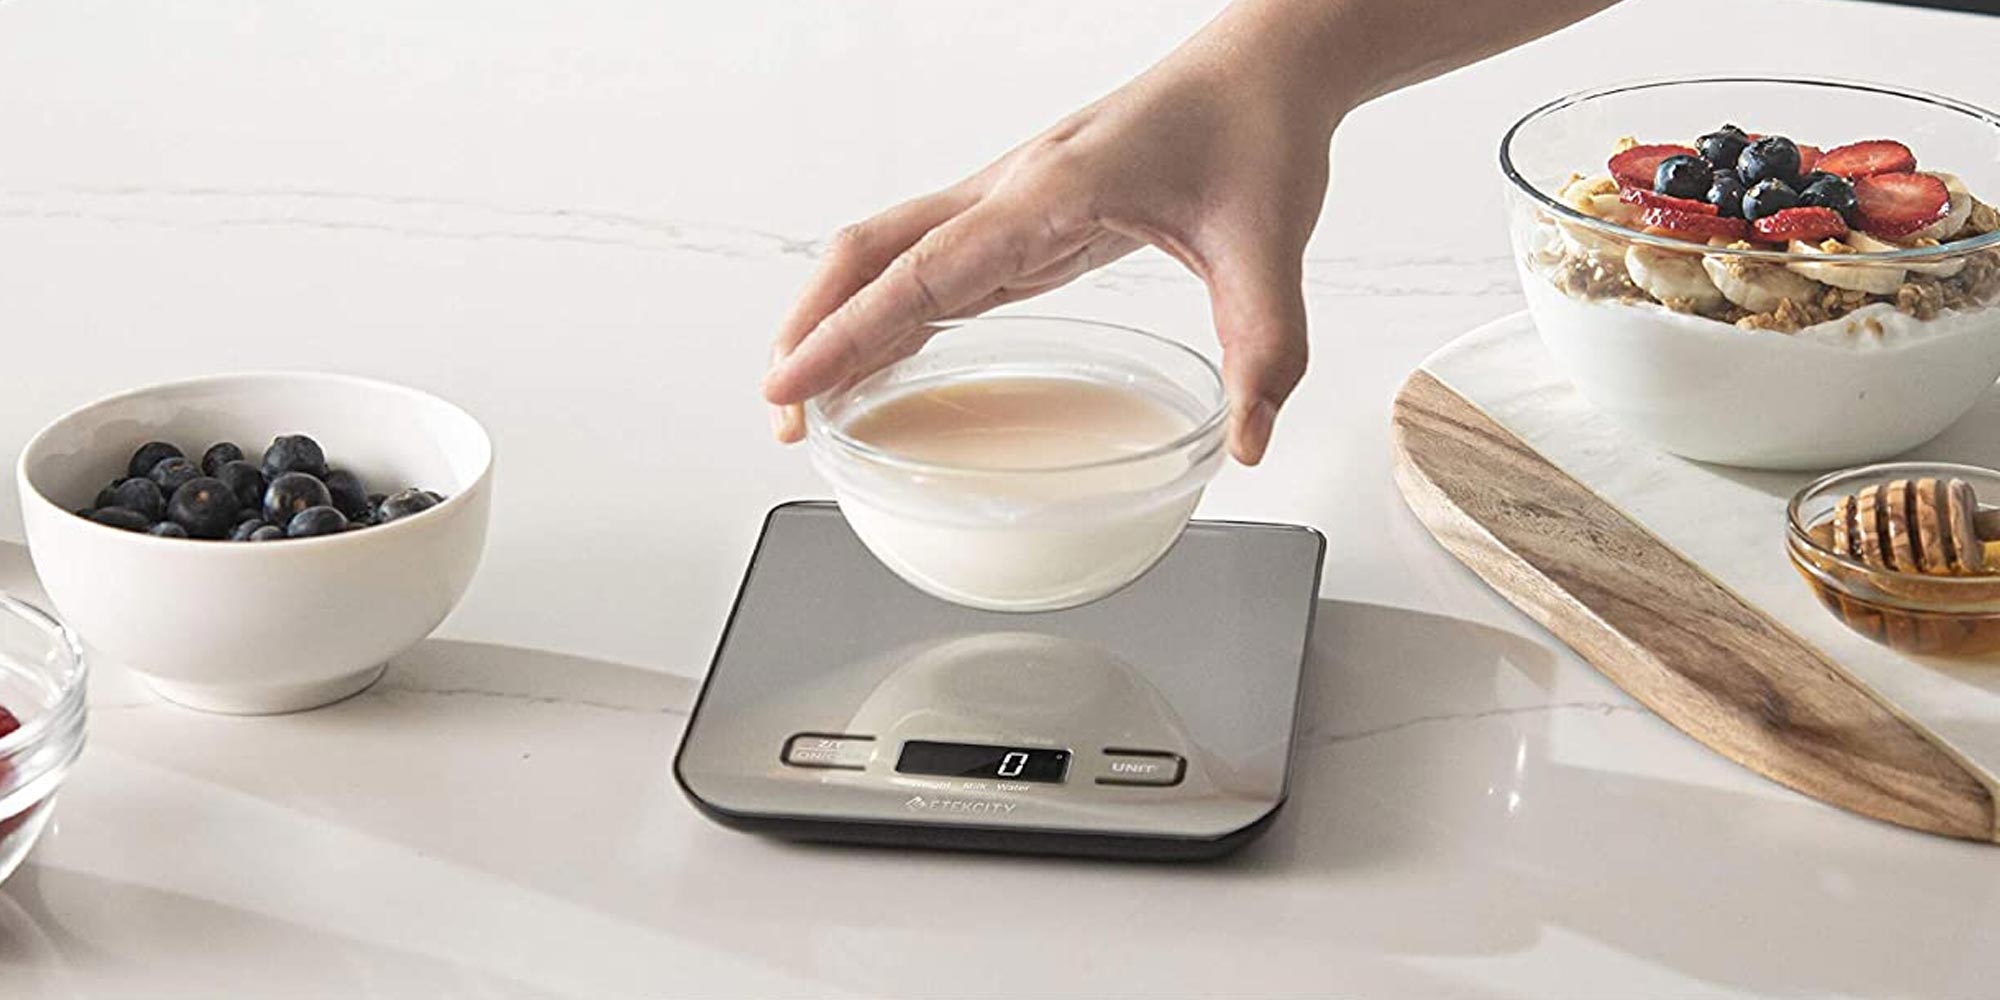 Etekcity's highly-rated digital kitchen scale falls to lowest price in  years at just $8